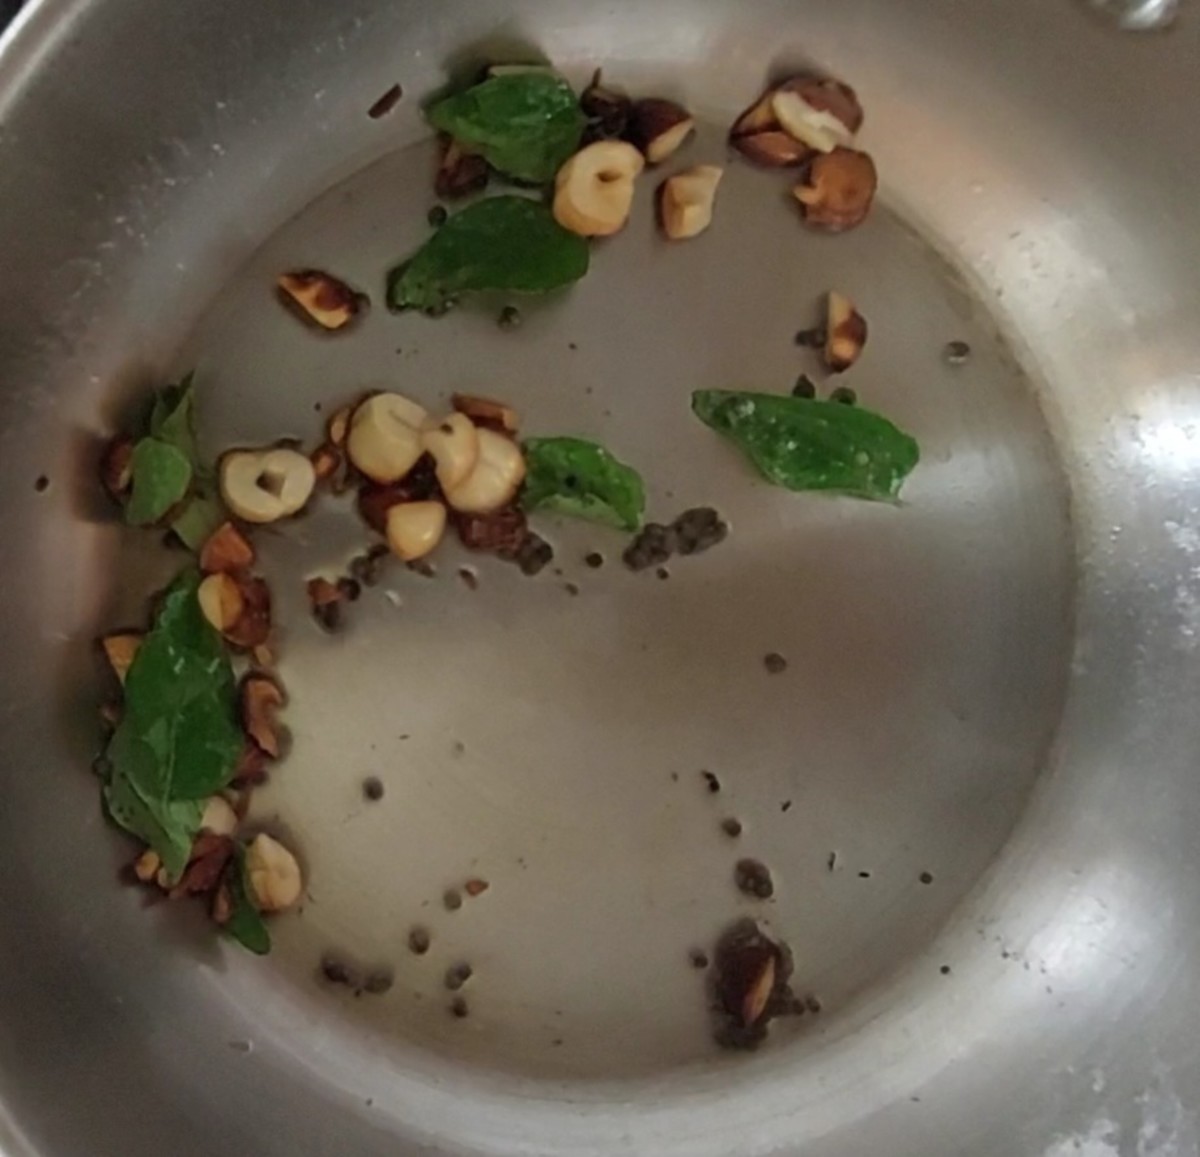 Splutter 1/2 teaspoon mustard seeds. Add 1 teaspoon chopped almonds and 1 teaspoon chopped cashews. Fry till golden brown and crisp. Add 1 sprig curry leaves and fry for a few seconds.